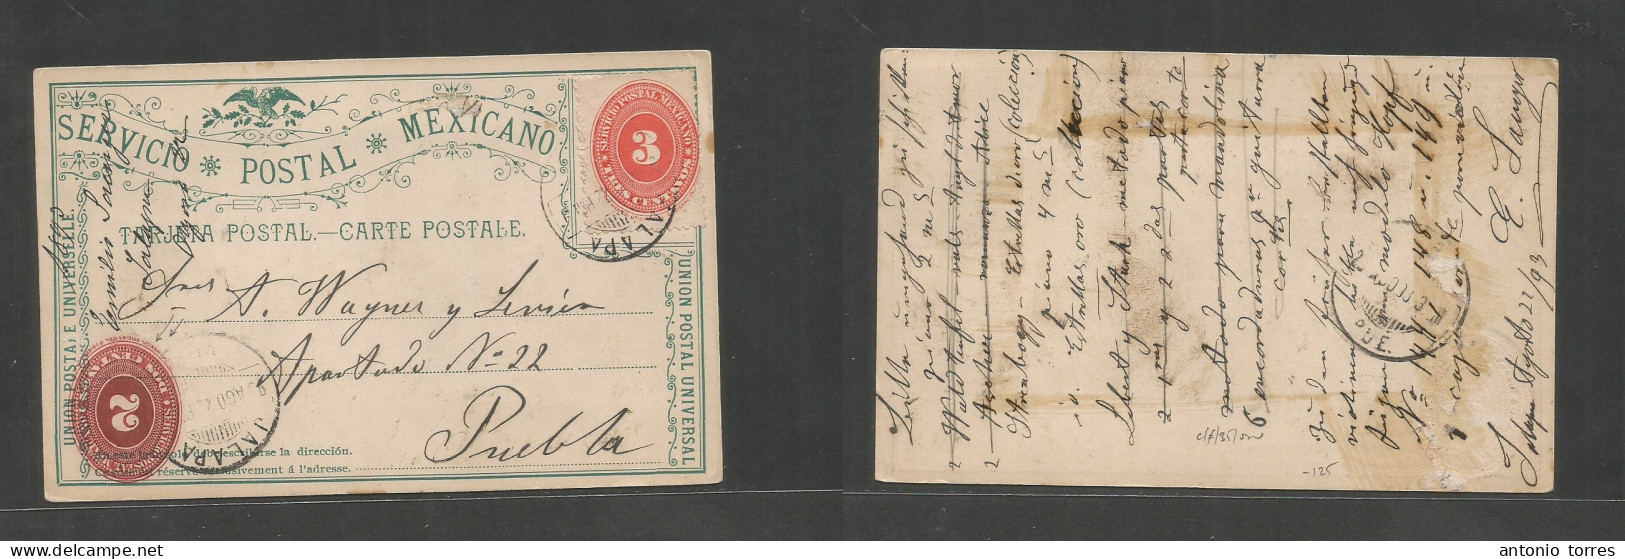 Mexico - Stationery. 1893 (22 Aug) Jalapa - Puebla. SPM 3c Vermelion Large Numeral Stat Card + 3c Red Adtl Inverted Prin - Mexico